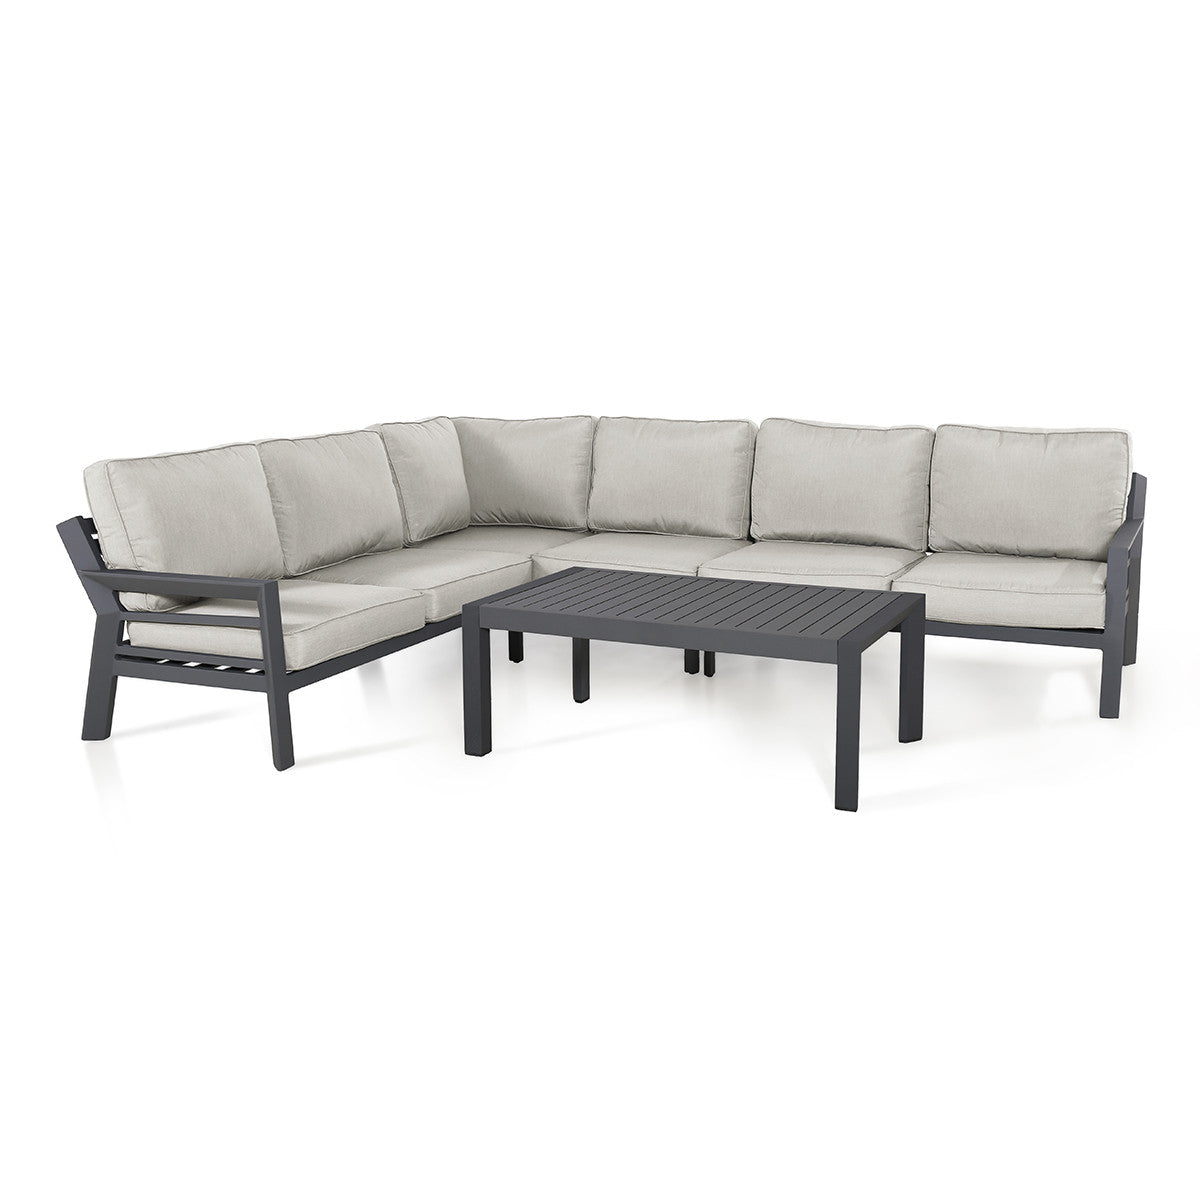 New York Corner Sofa Set Dove Grey From Side-Better Bed Company